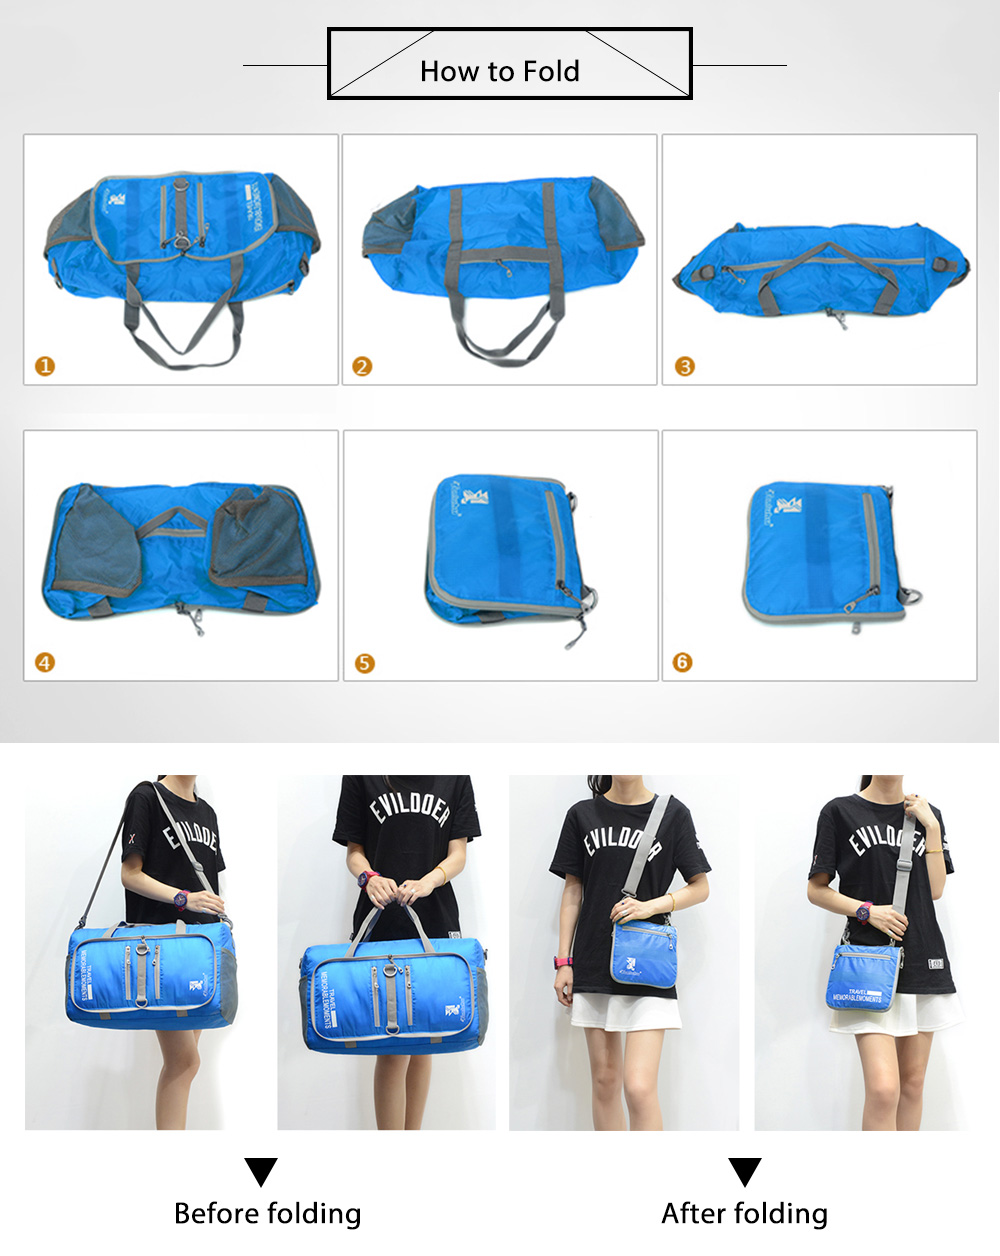 Tanluhu 682 25L Outdoor Large Capacity Foldable Duffle Bag Gym Traveling Luggage Pack